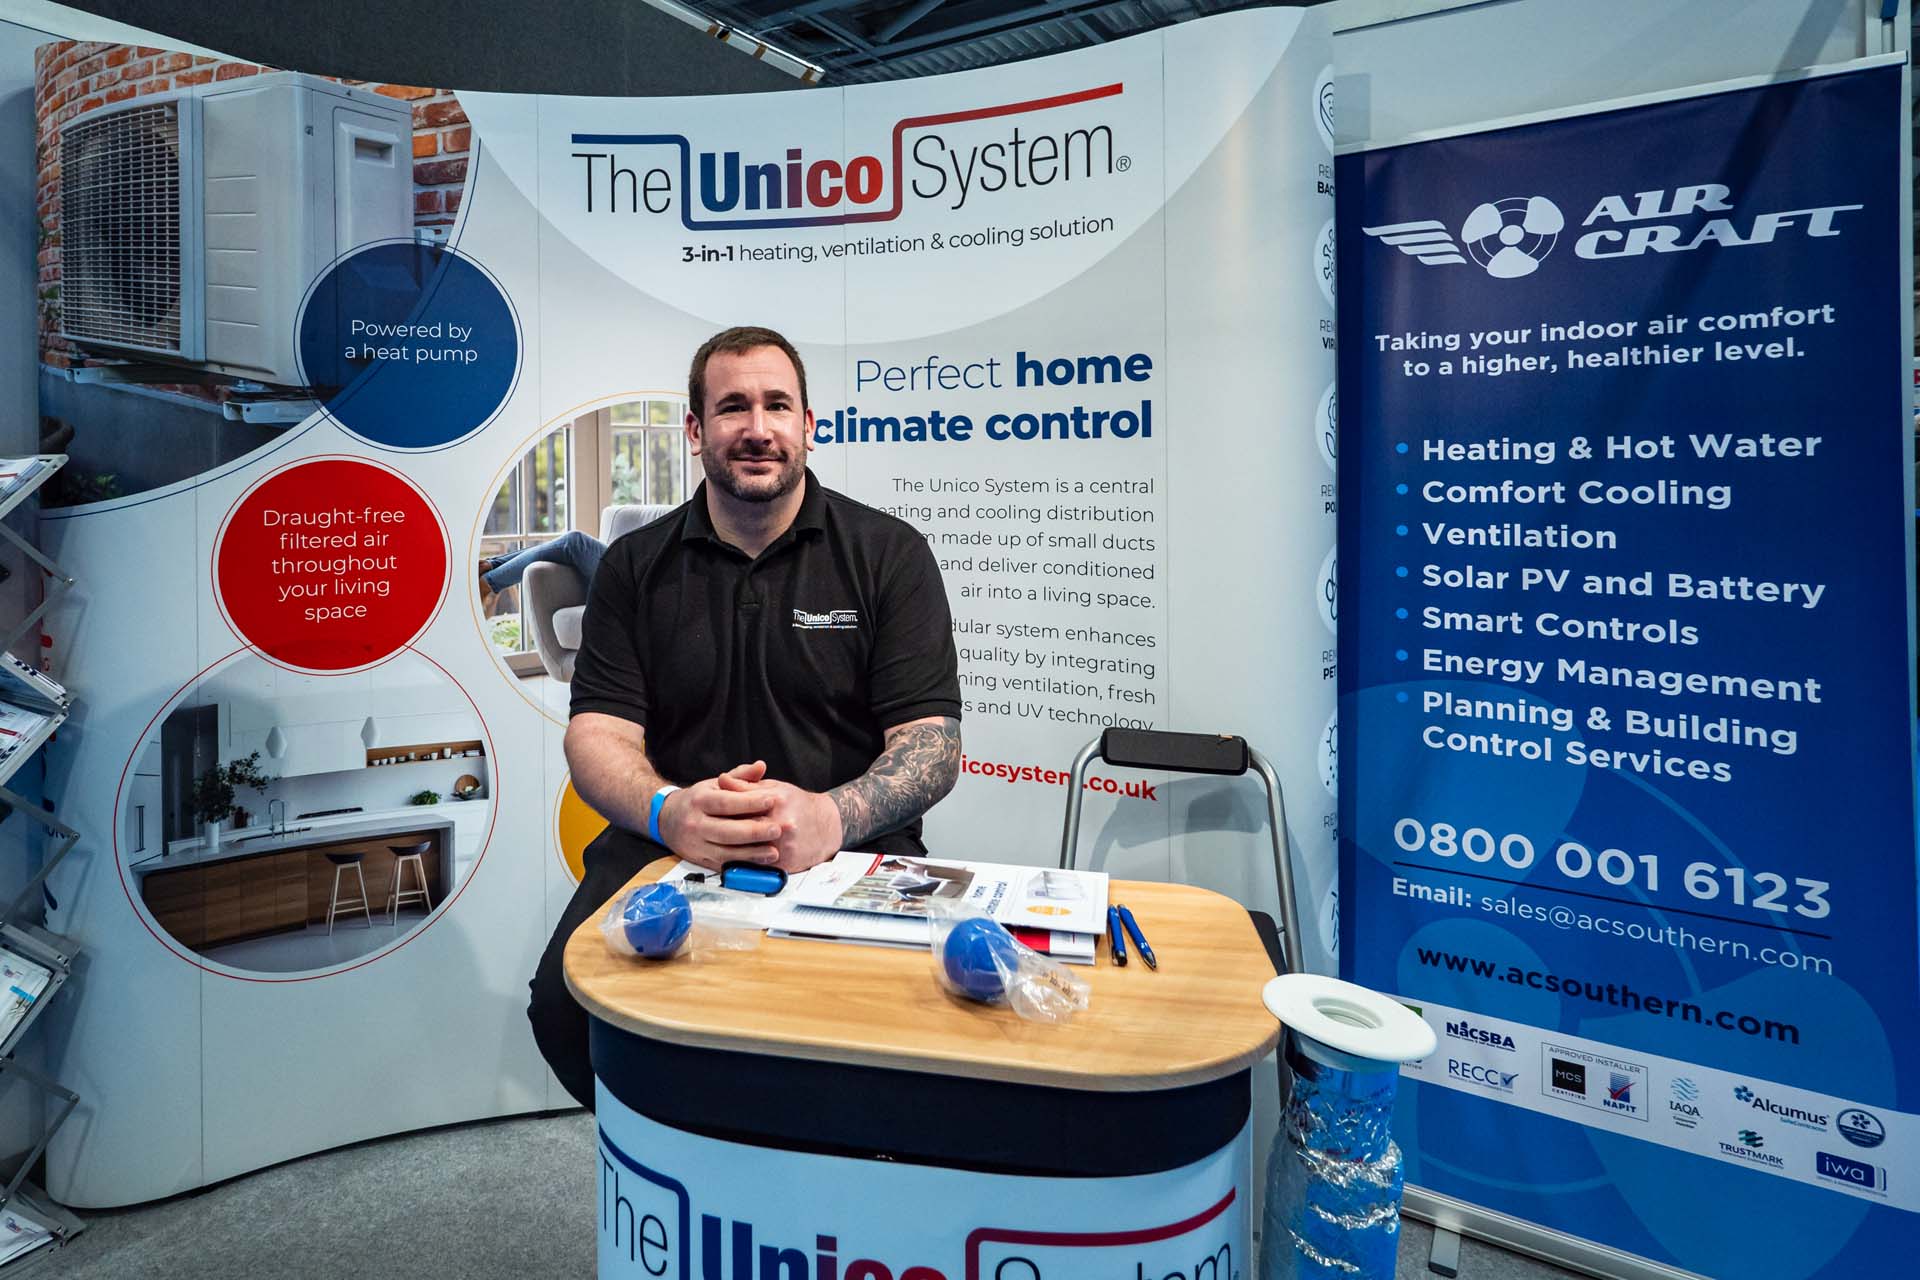 The Unico System and Aircraft heating ventilation and cooling solutions Homebuilding Renovating Show HBR Farnborough